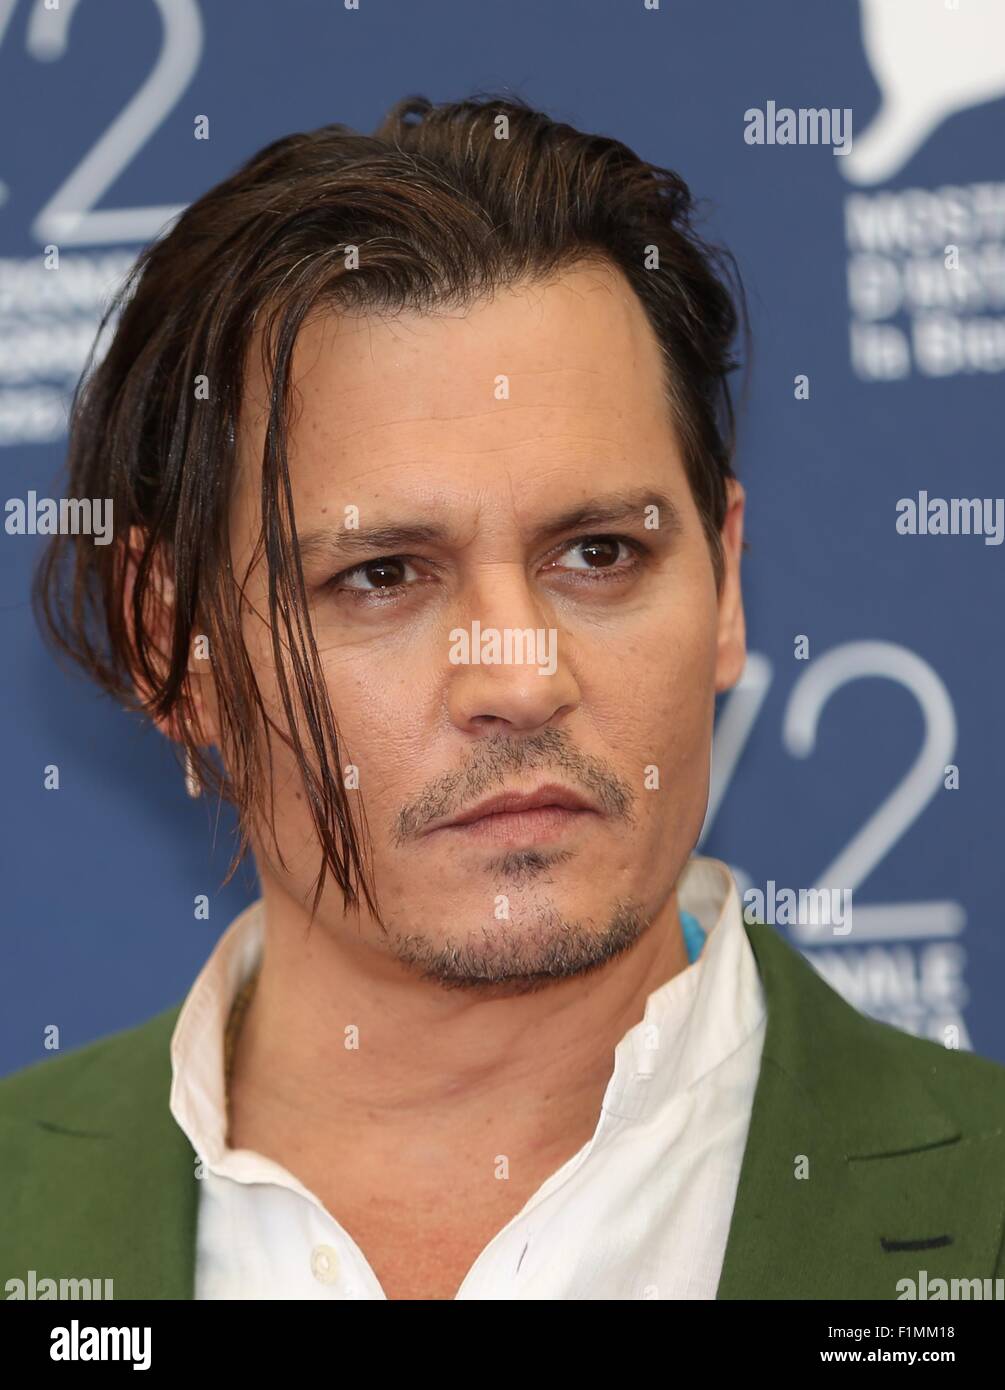 Venice, Italy. 4th September, 2015. Johnny Depp attends the photocall ...